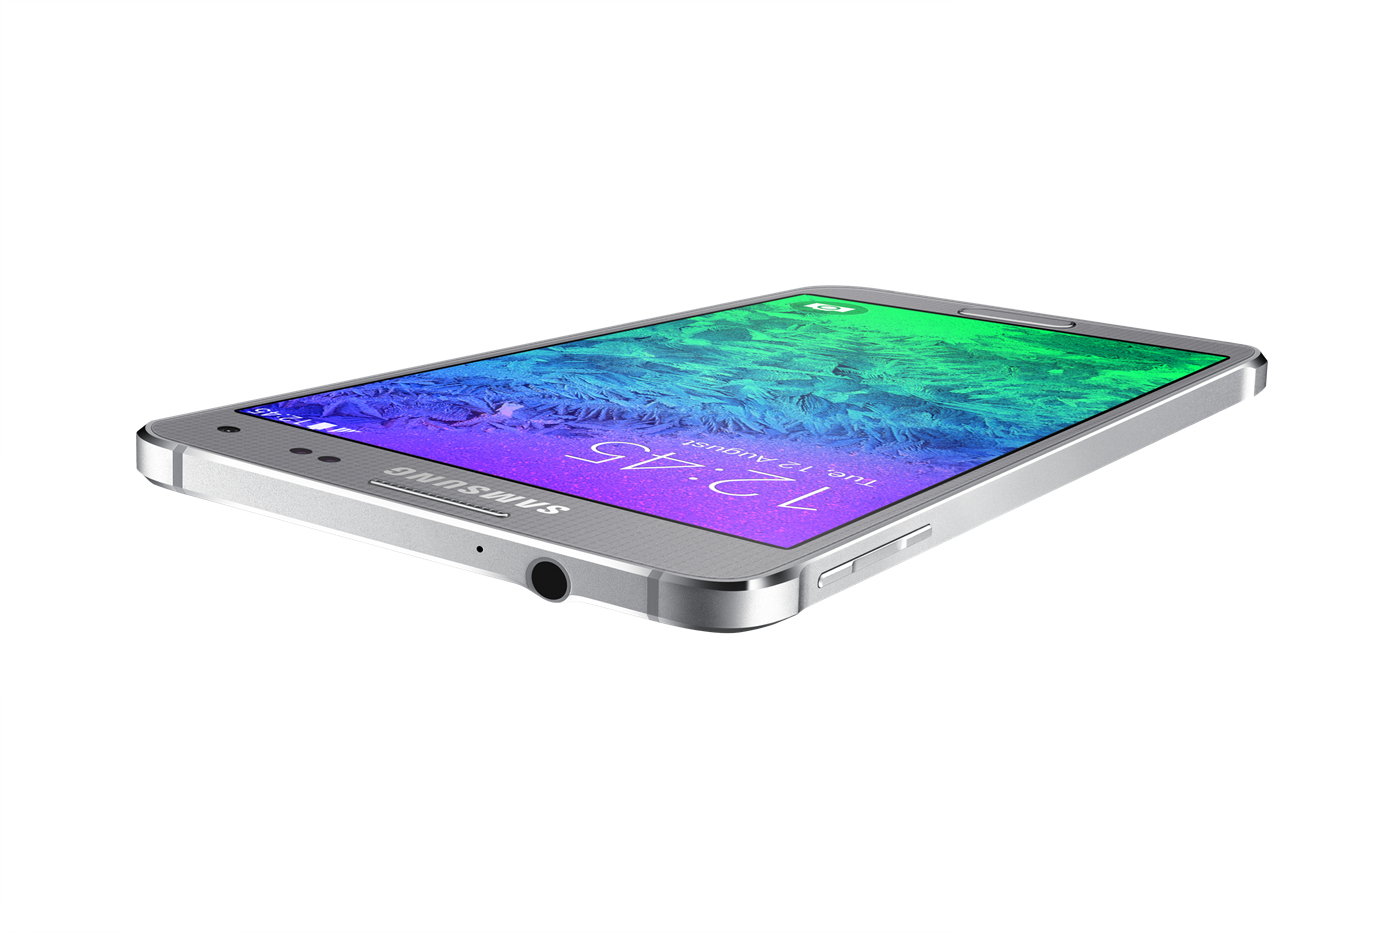 03 SM G850F 009 silver - Samsung makes the Galaxy Alpha Official with a Metal Frame